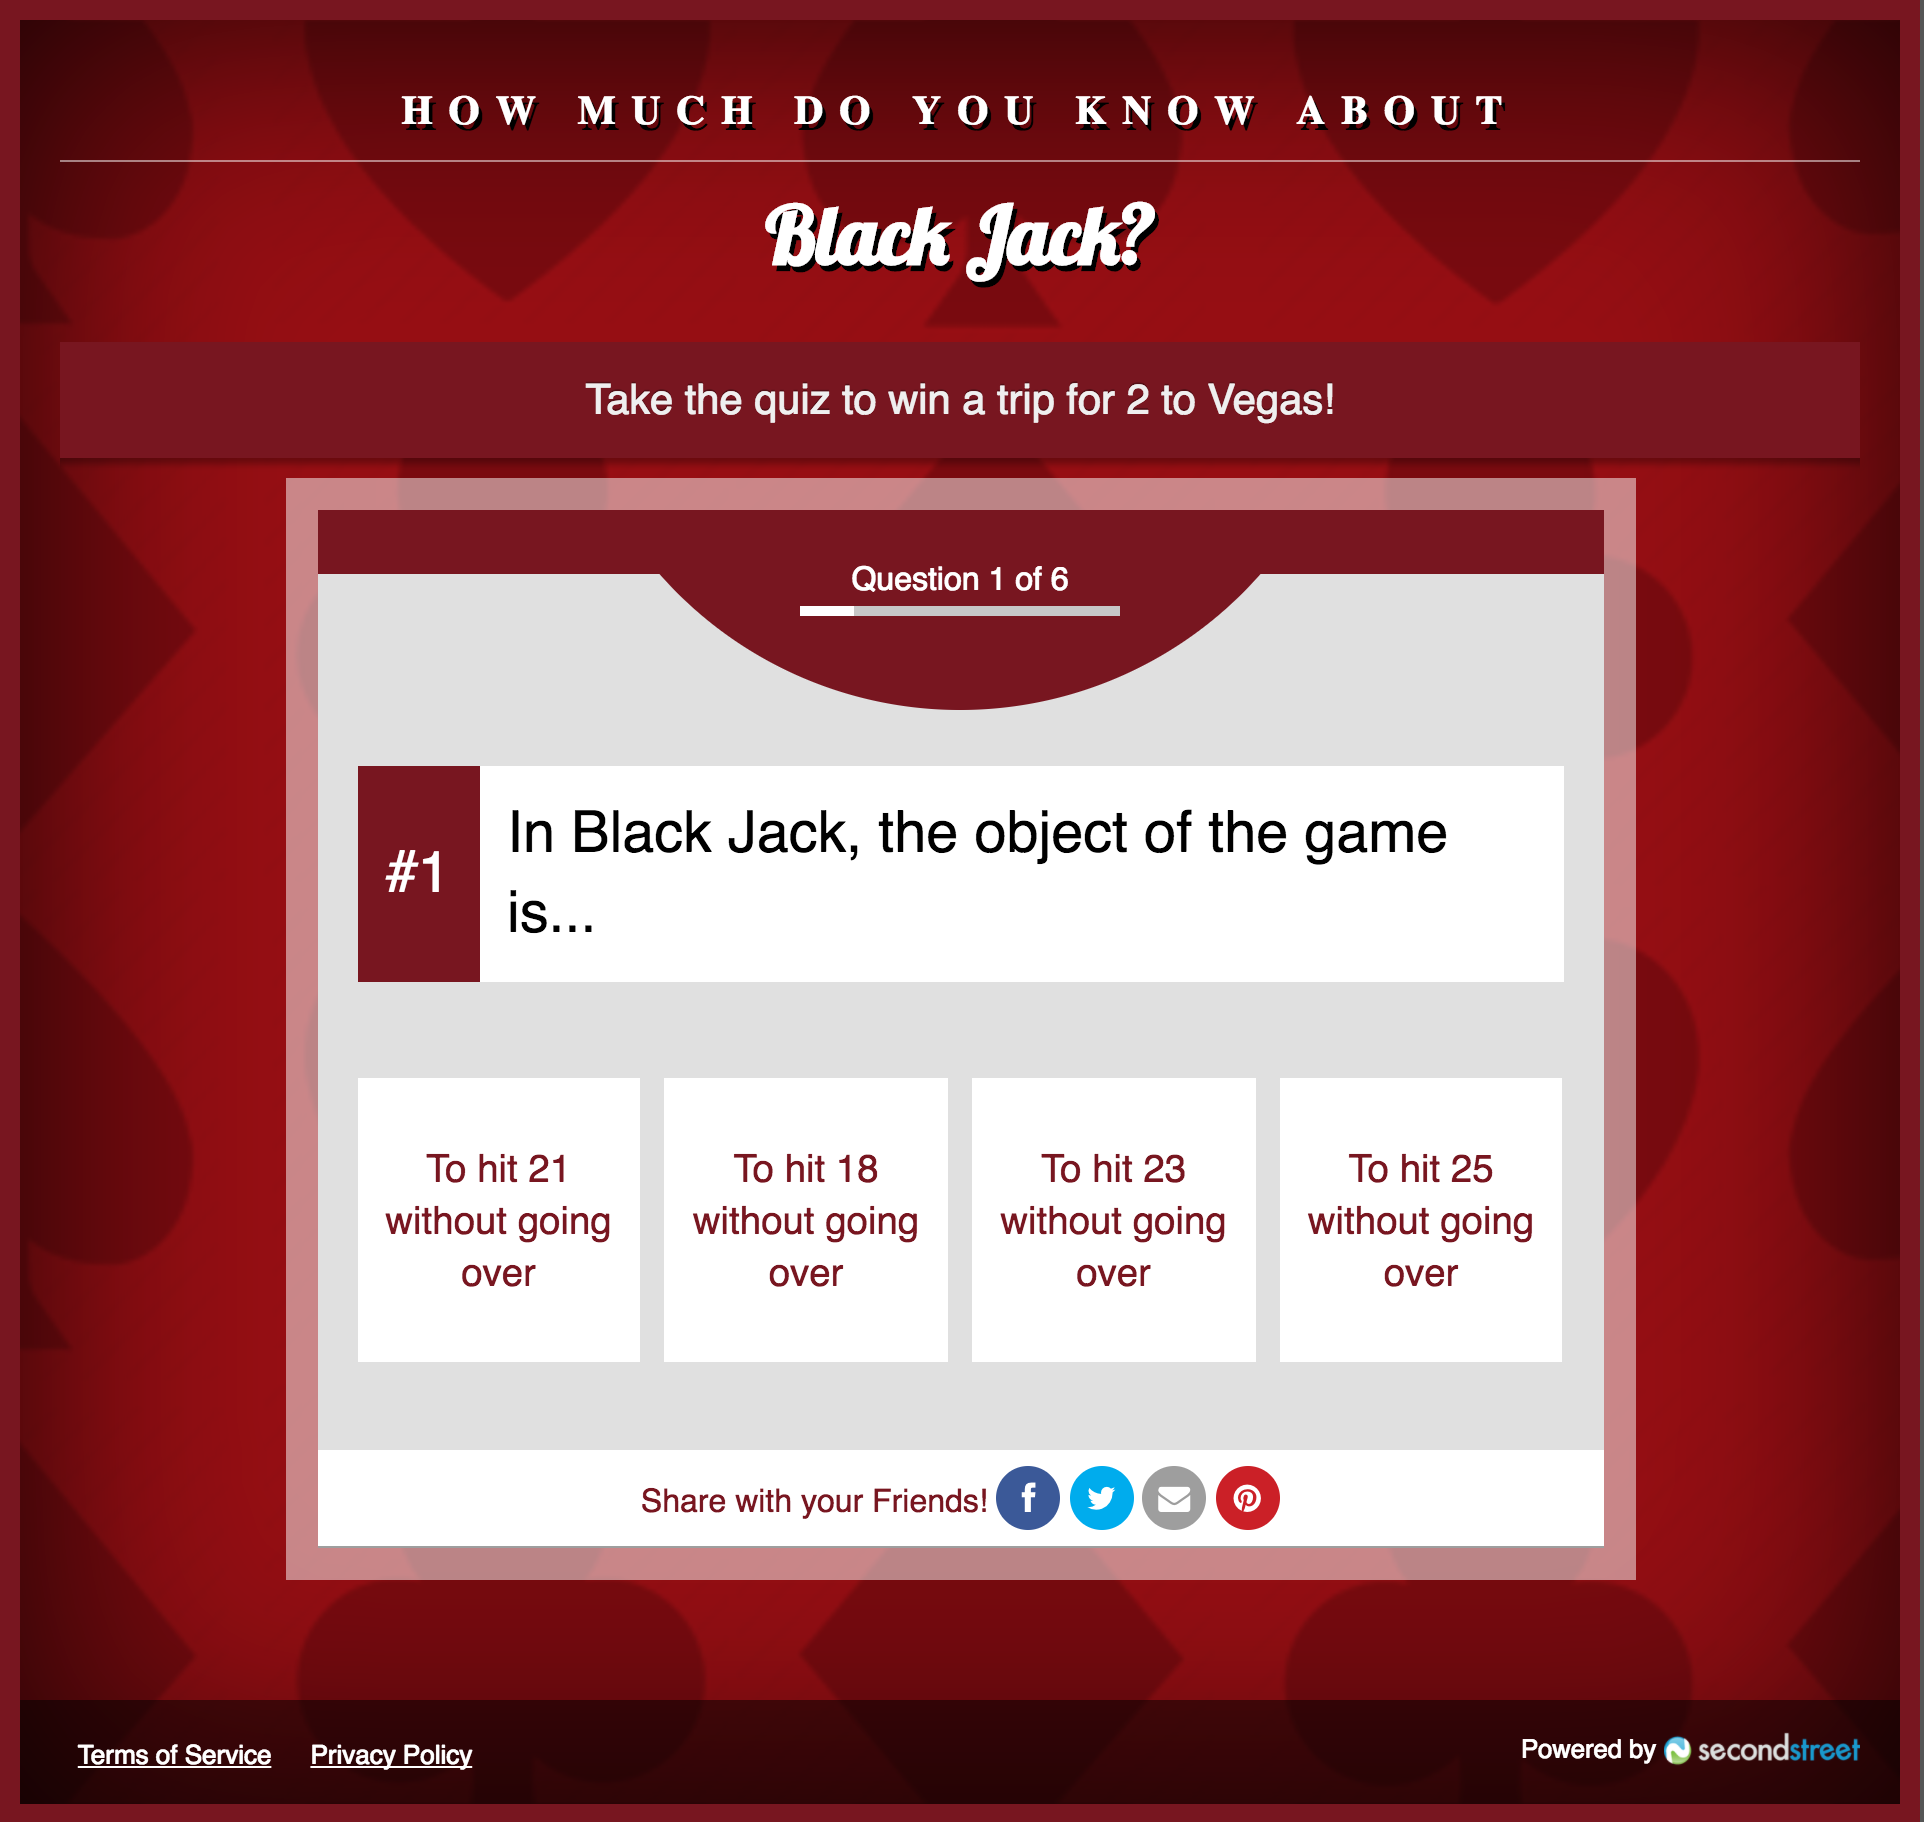 Quizzes are Perfect for Casinos